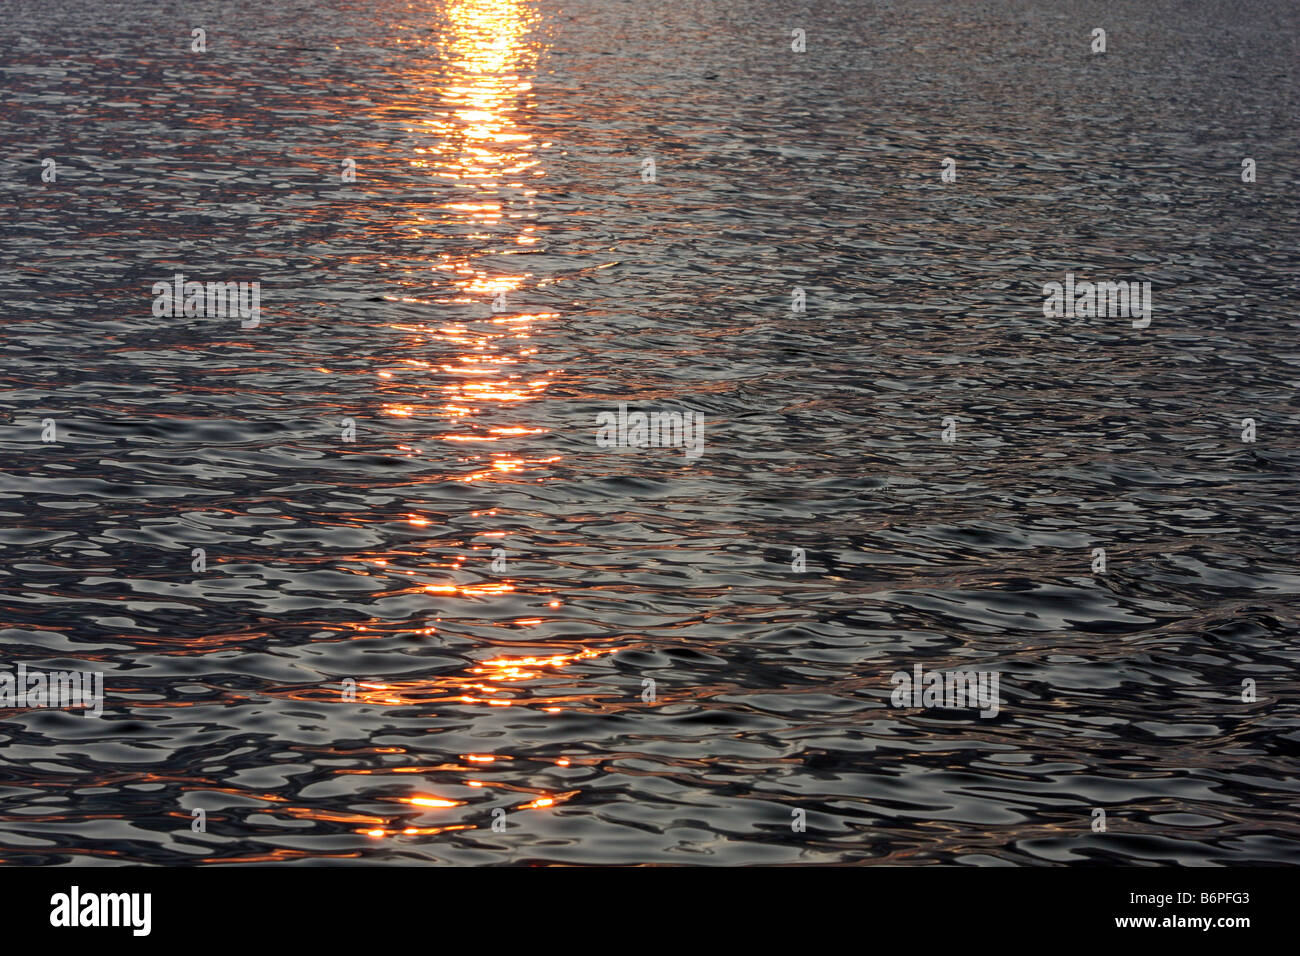 Reflection of the sun as it rises in the Mediterranean sea Stock Photo